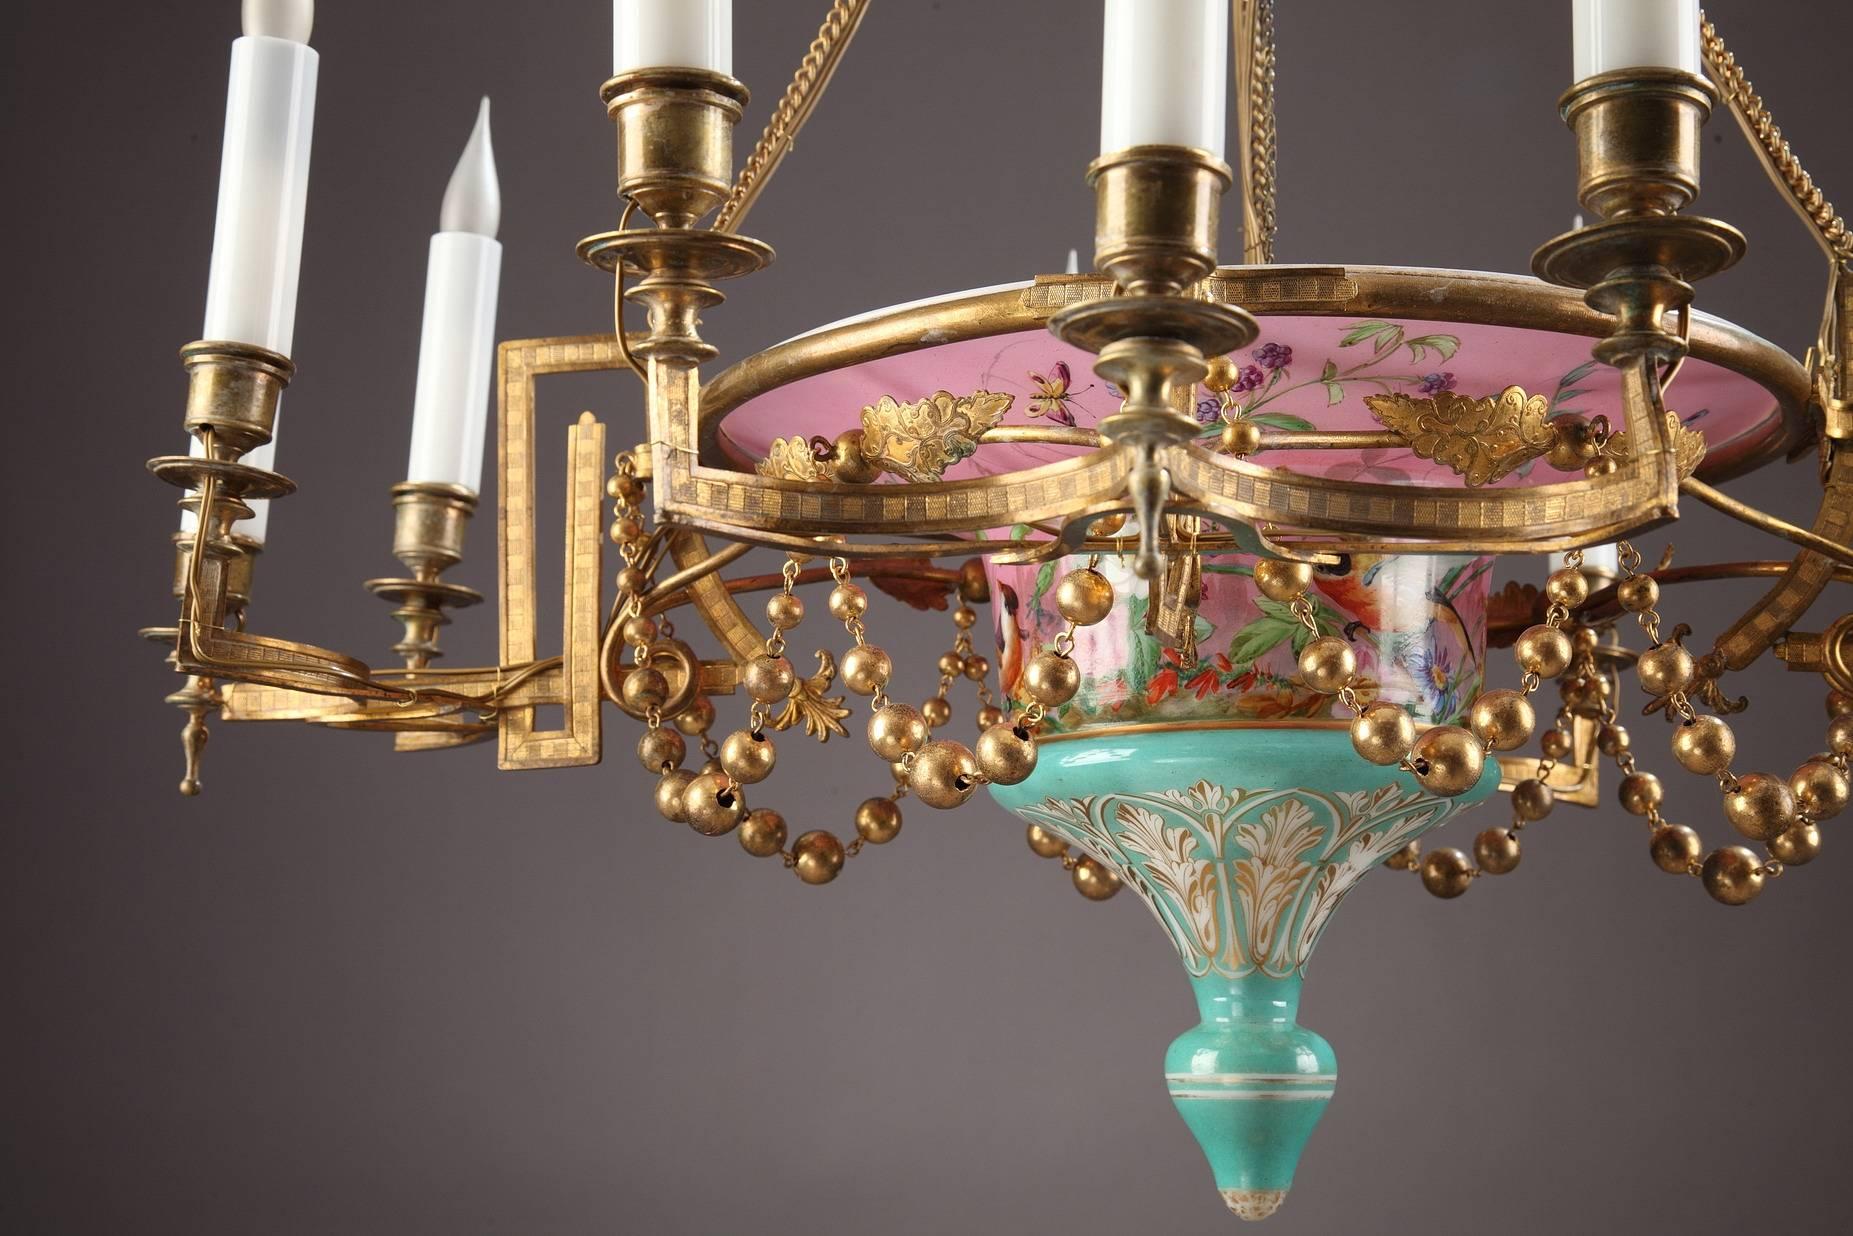 Interesting twelve-light chandelier decorated with multicolored birds, flowers, foliage and butterflies on pink and green background. Candle arms distributed by groups of three extend from the central piece and are hanged on the crown atop by